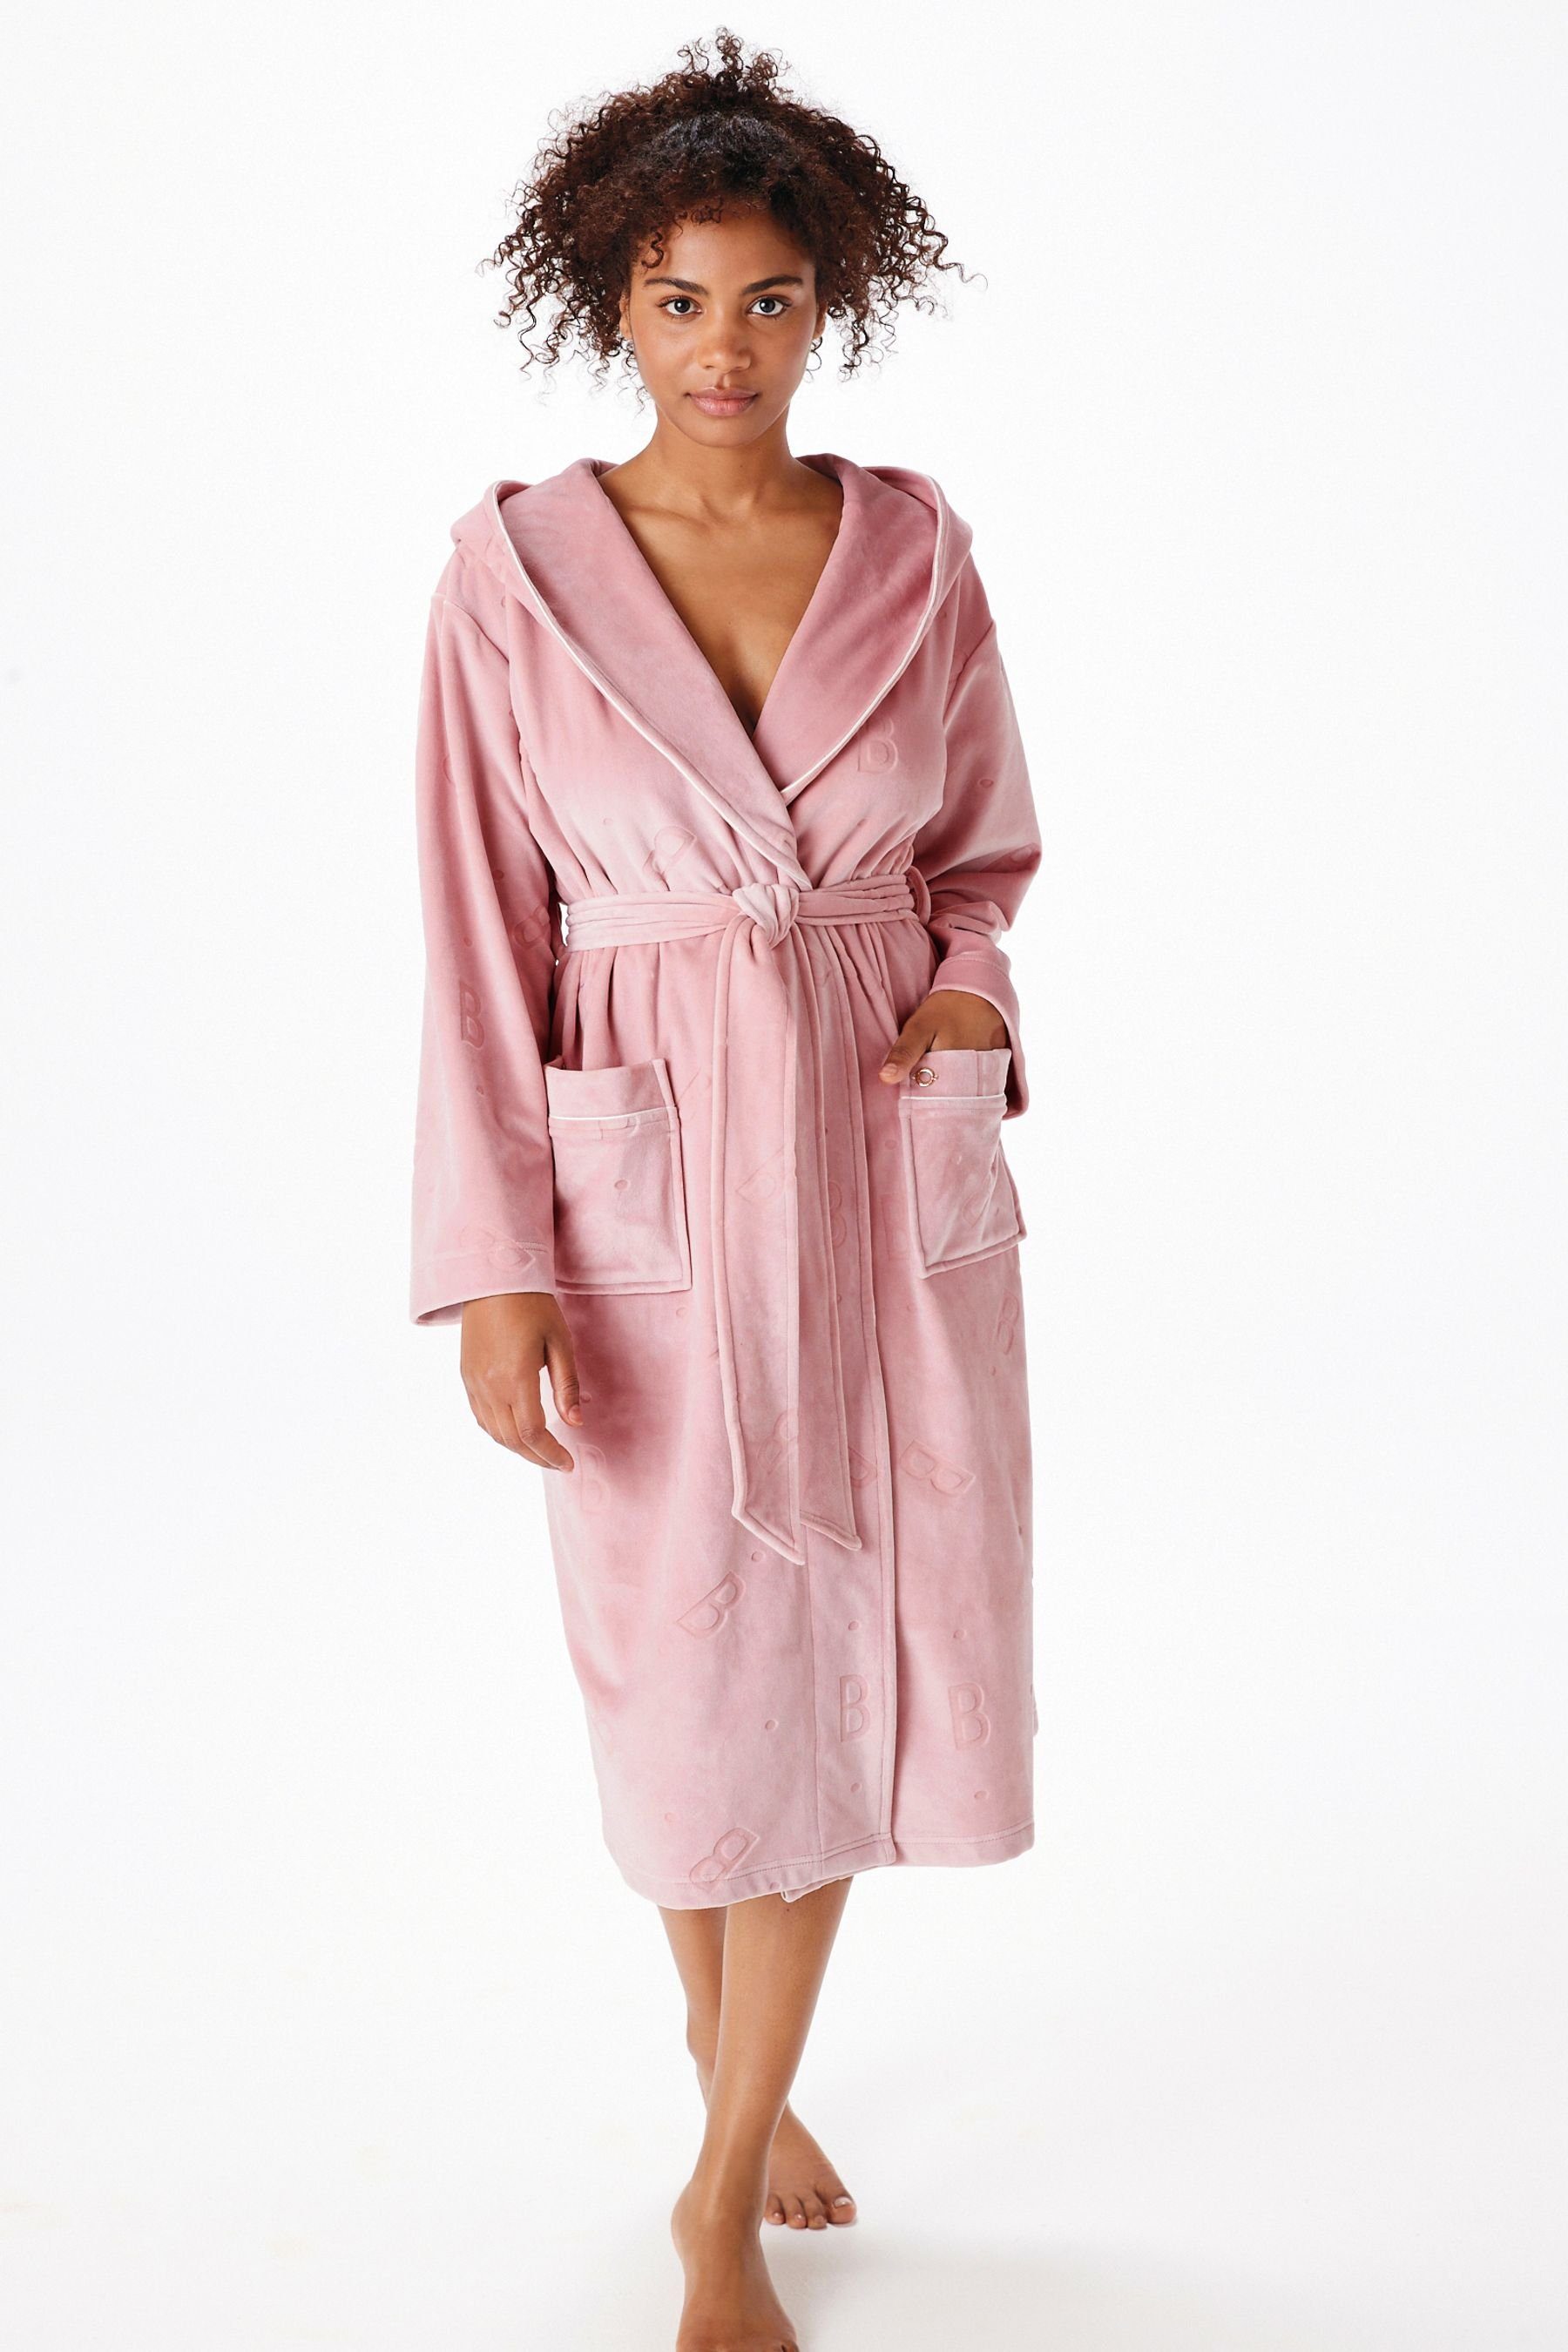 B by Ted Baker Damenbademantel Baker Polyester, Pink Bademantel, Kuscheliger Elasthan Ted by B